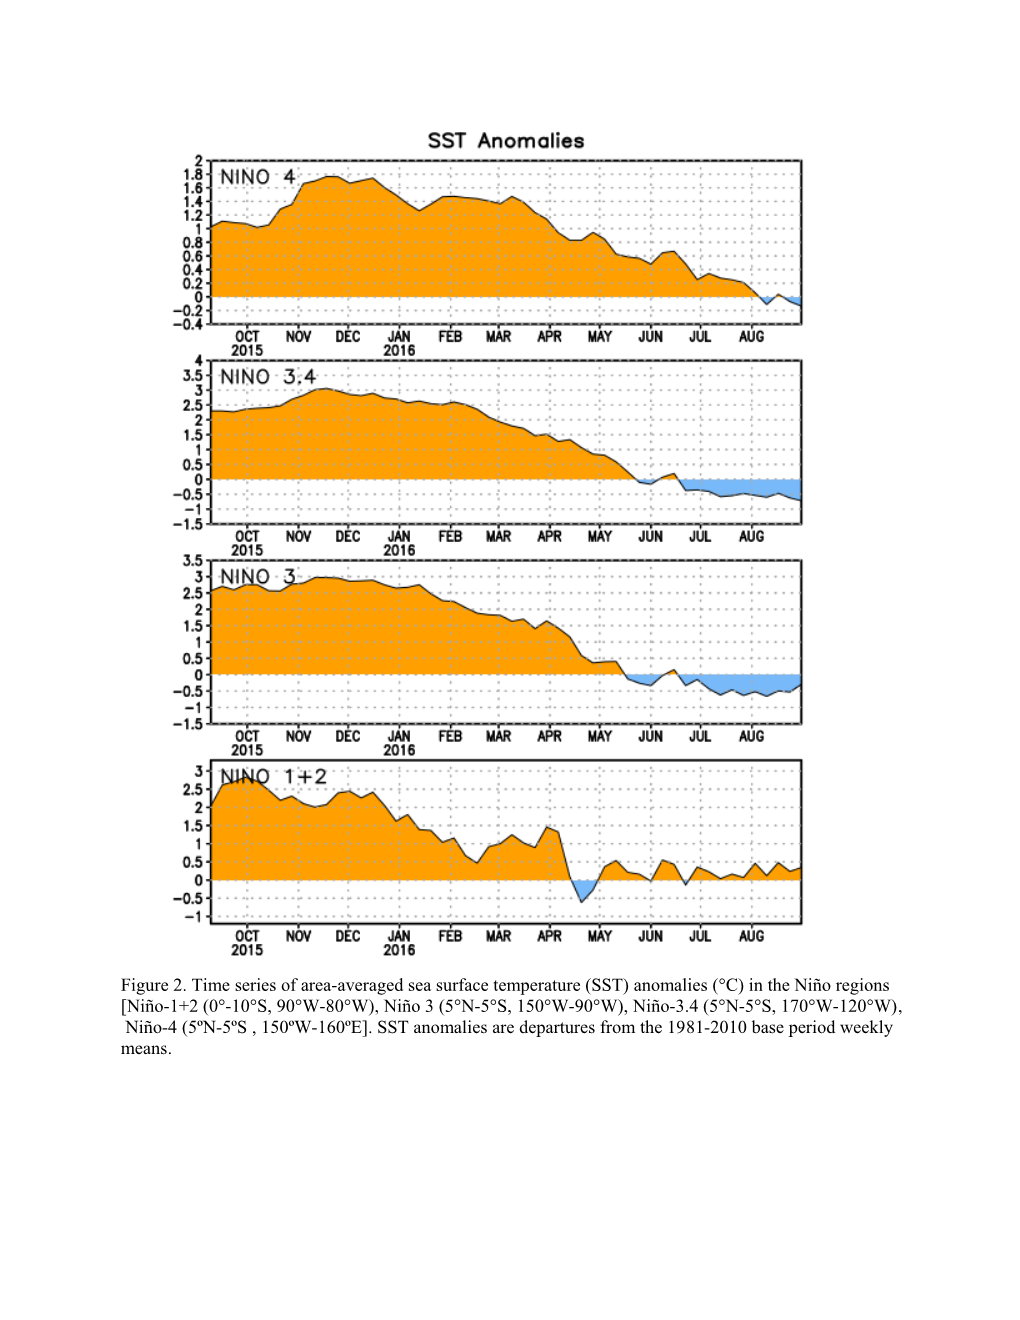 Synopsis: ENSO-Neutral Conditions May Transition to La Niña Co s1